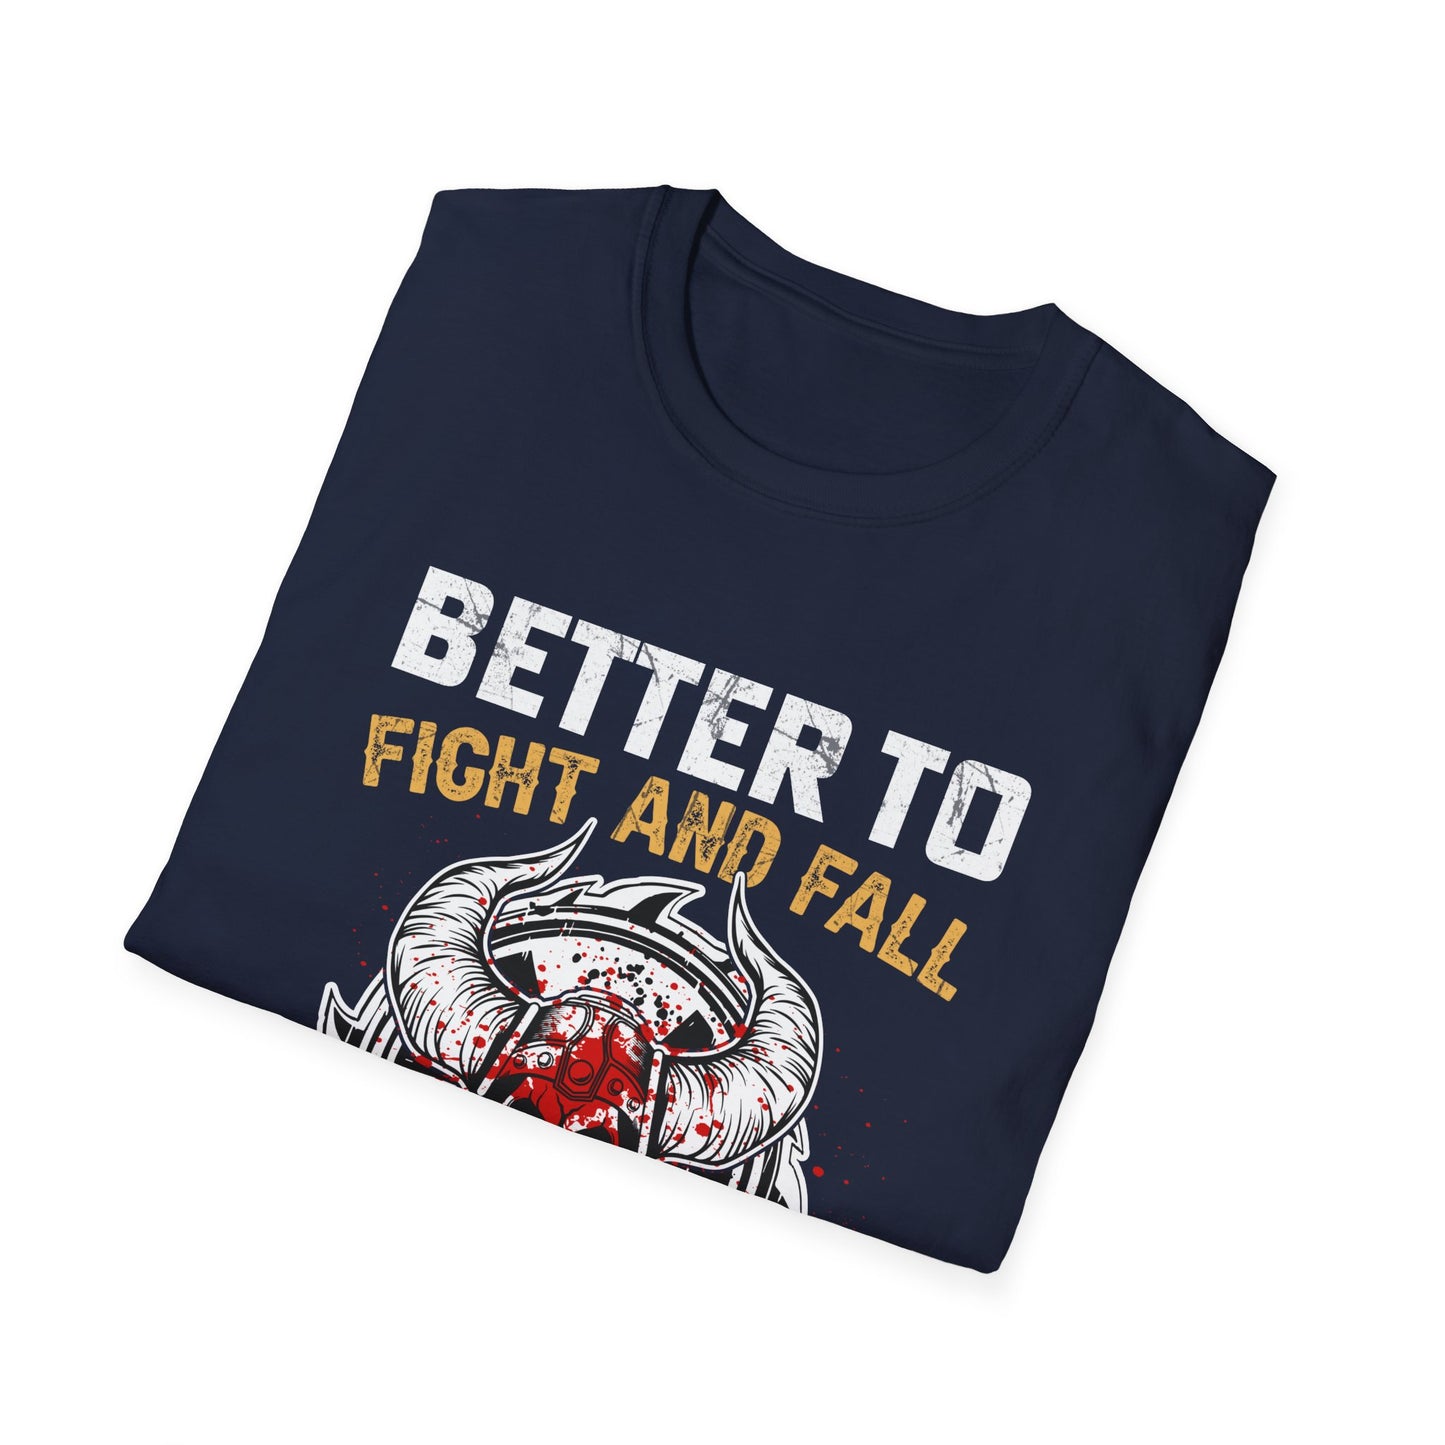 Better To Fight And Fall Than To Live Without Hope Viking T-Shirt